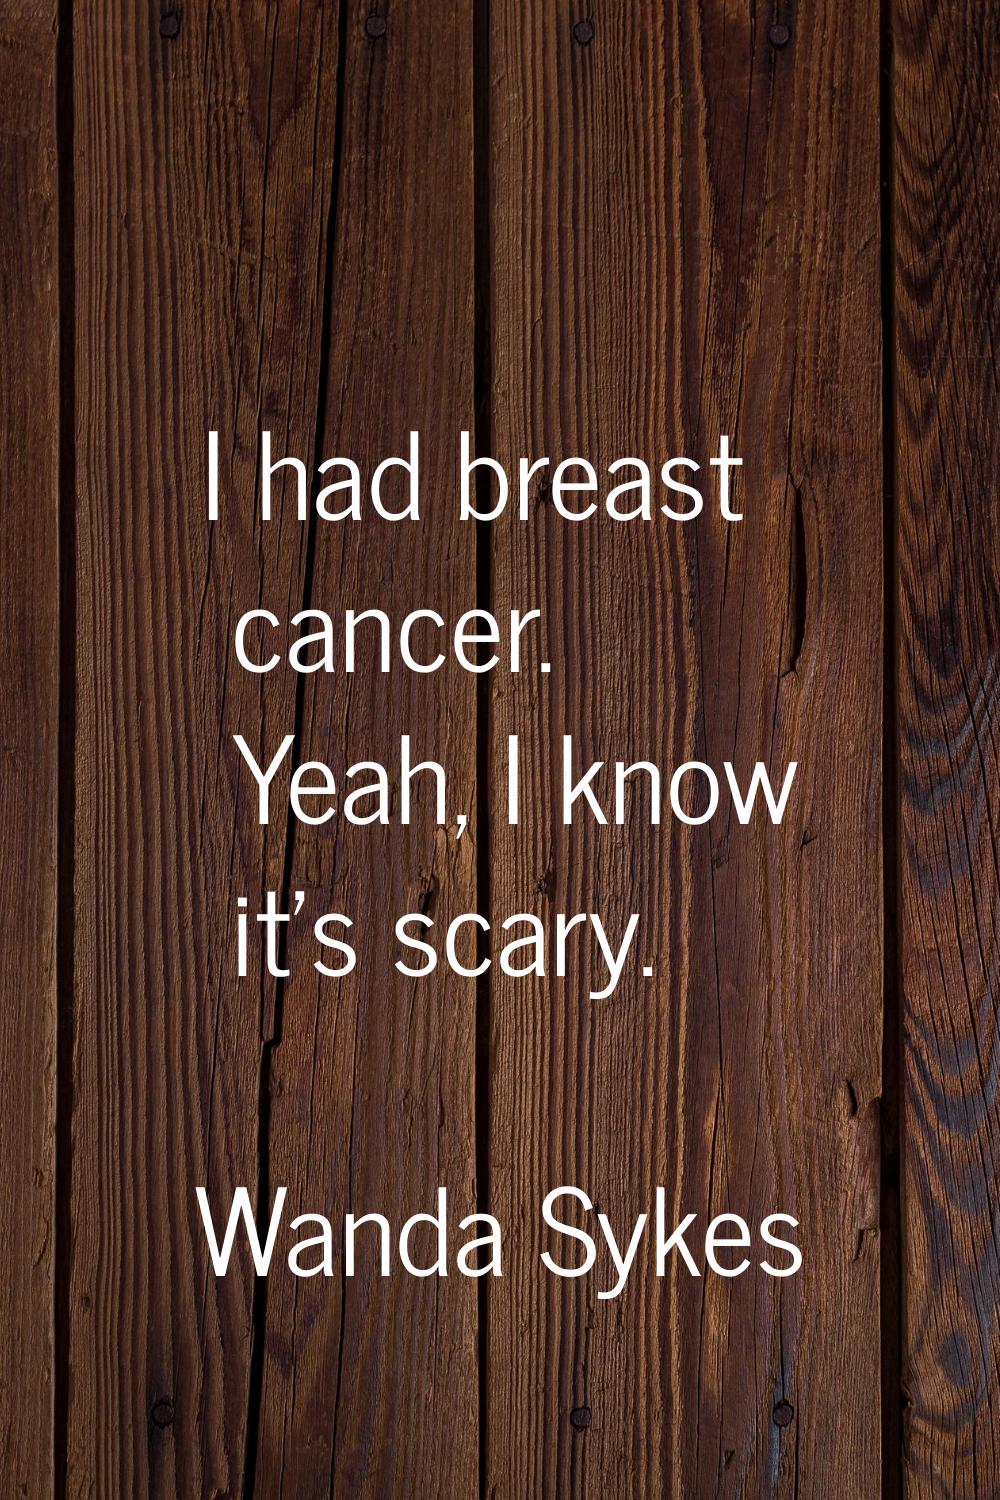 I had breast cancer. Yeah, I know it's scary.